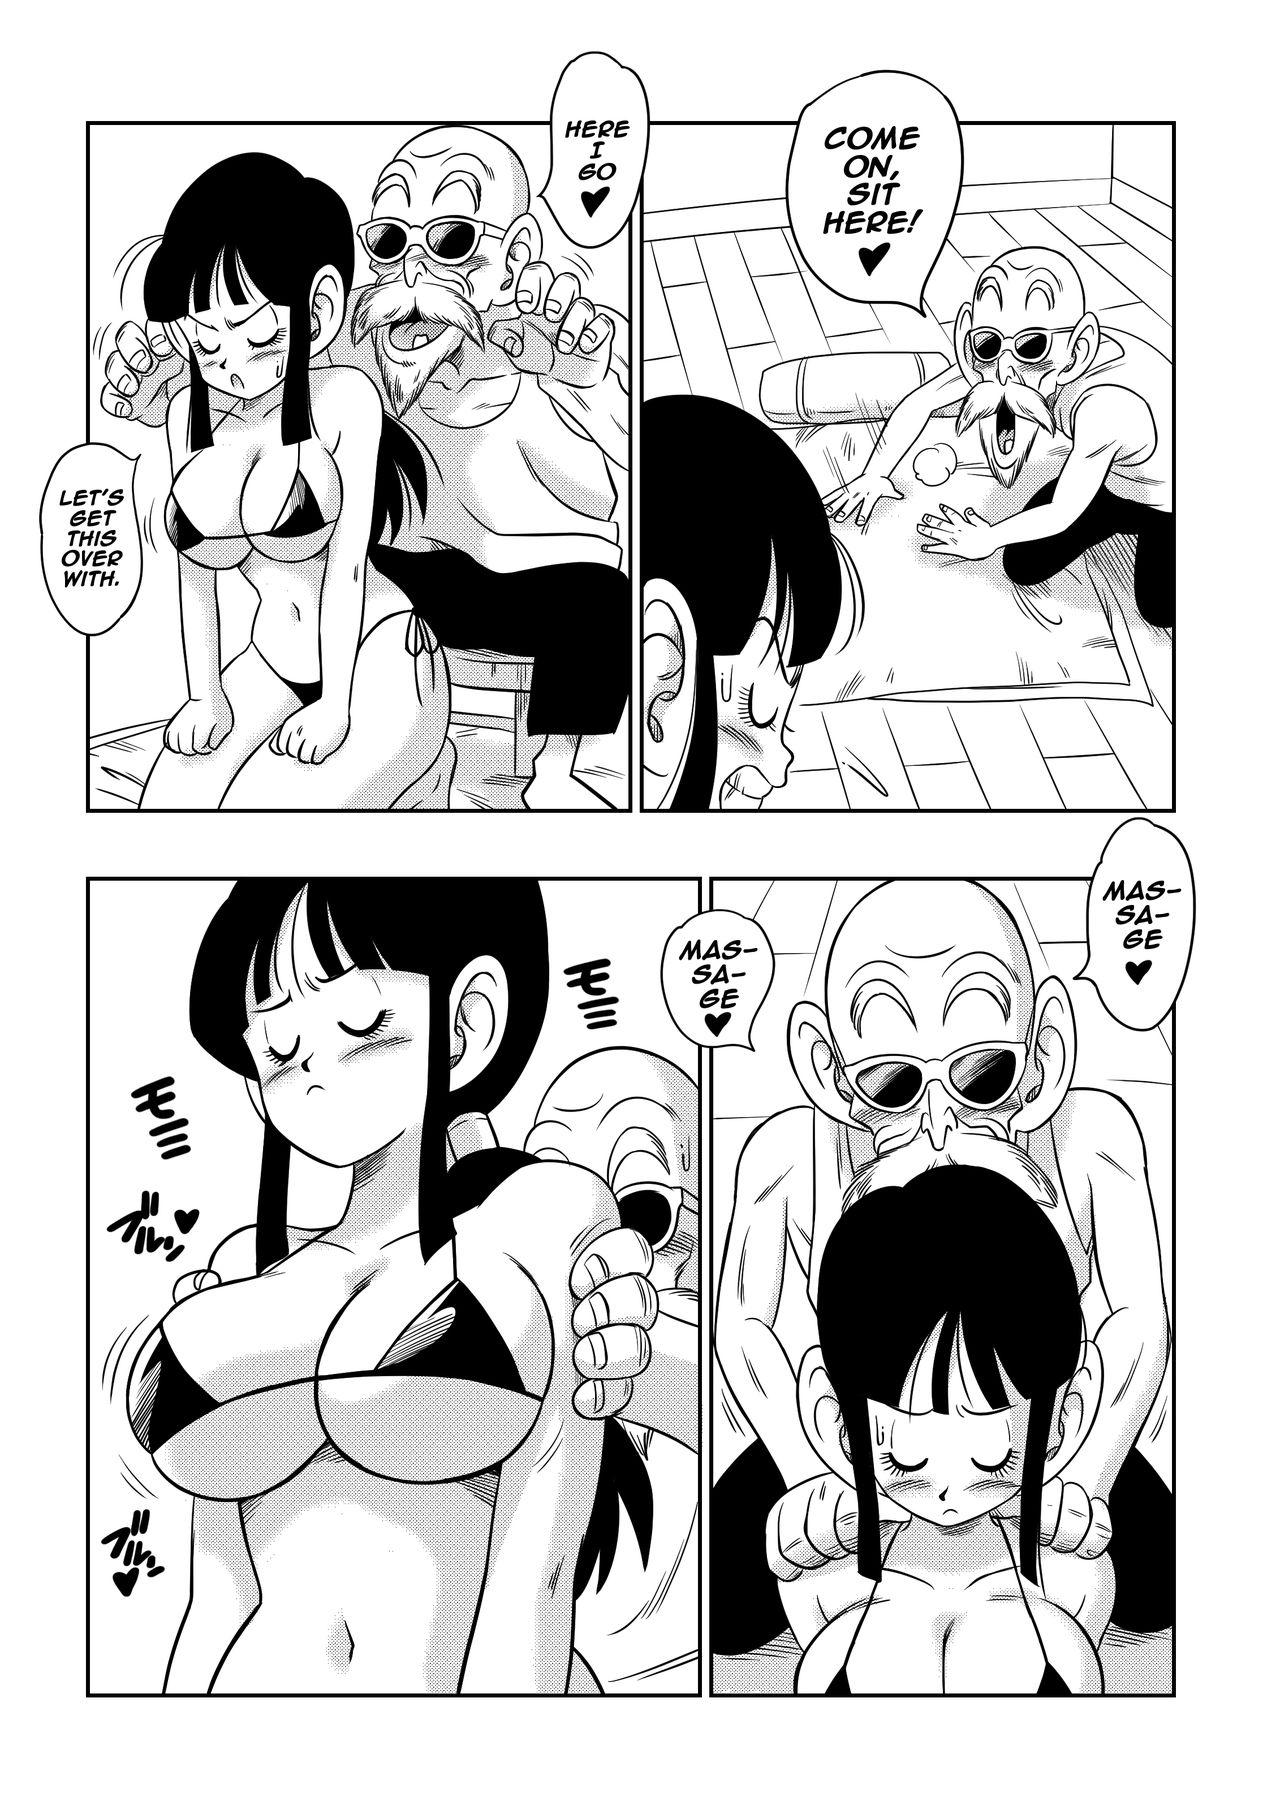 Hot Girl Fucking "An Ancient Tradition" - Young Wife is Harassed! - Dragon ball z Nylons - Page 8